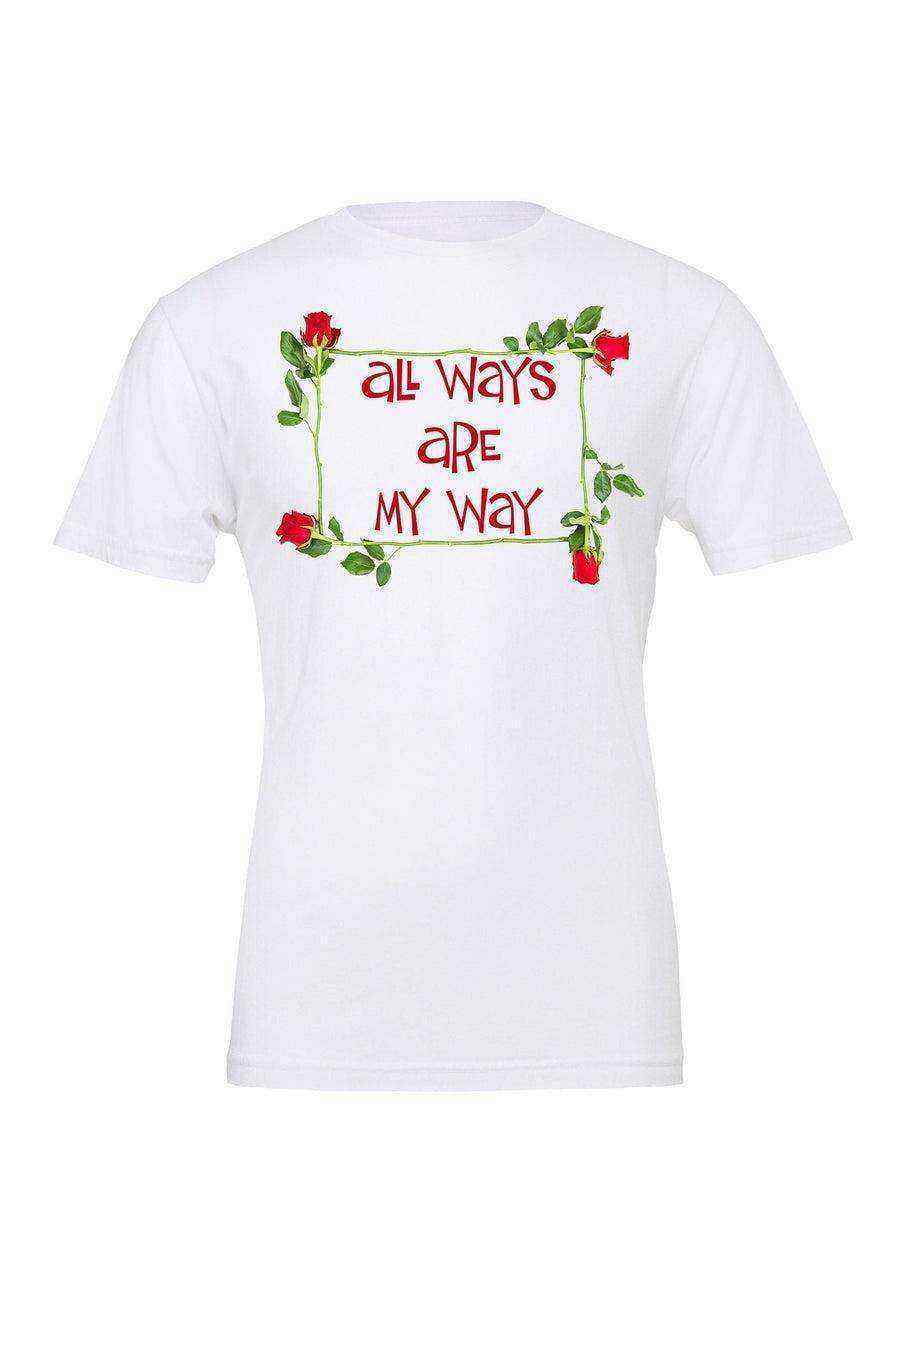 Youth | All Ways Are My Way Shirt | Queen Of Hearts Shirt - Dylan's Tees